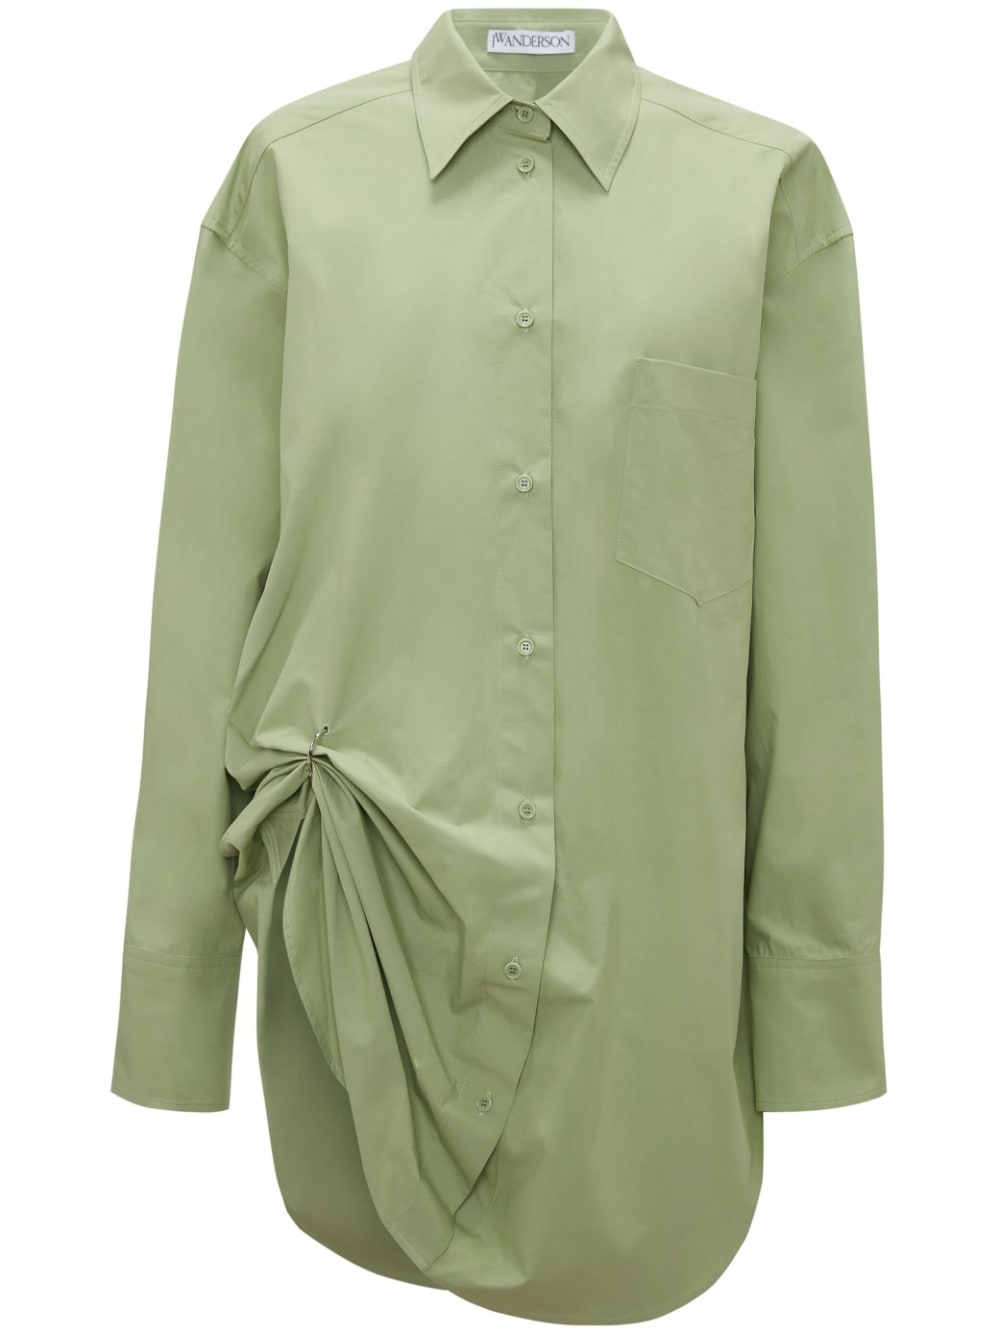 JW Anderson eyelet-detail oversized cotton shirt - Green